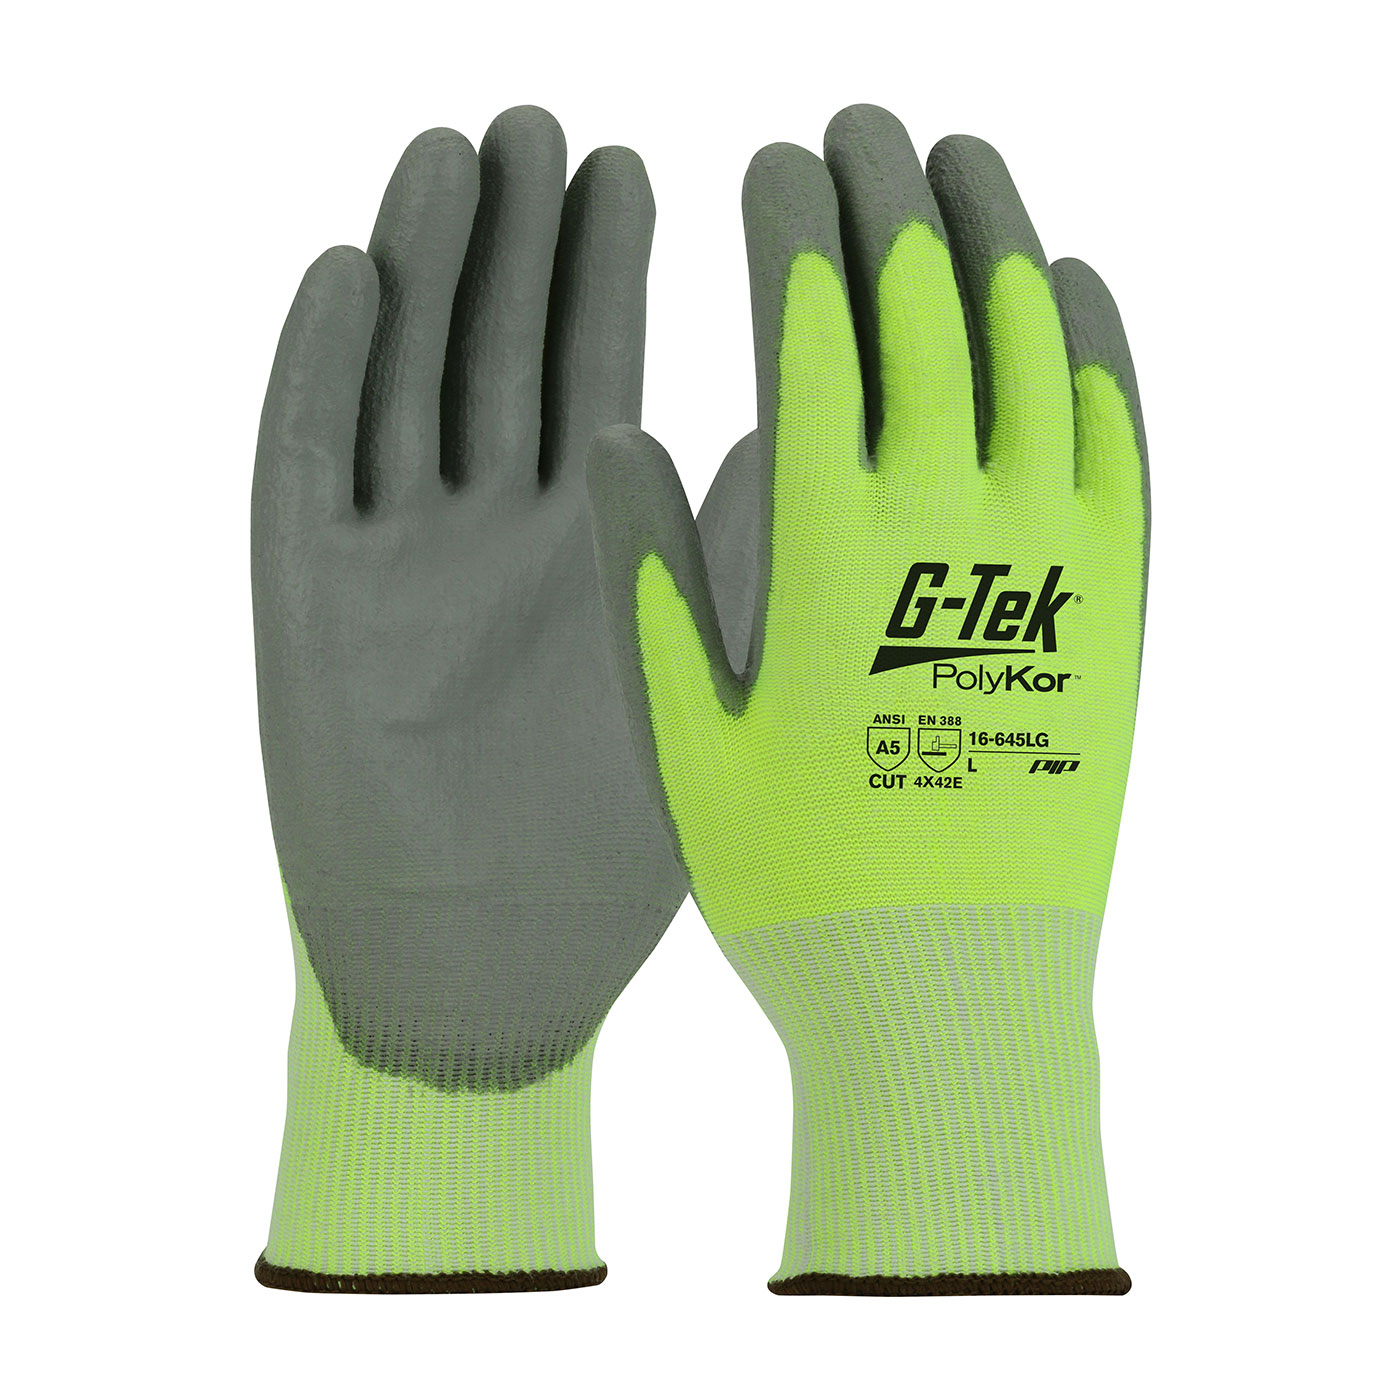 PIP 16-645LG/M G-Tek PolyKor Seamless Knit PolyKor Blended Glove with Polyurethane Coated Smooth Grip on Palm & Fingers - Medium PID-16645LGM